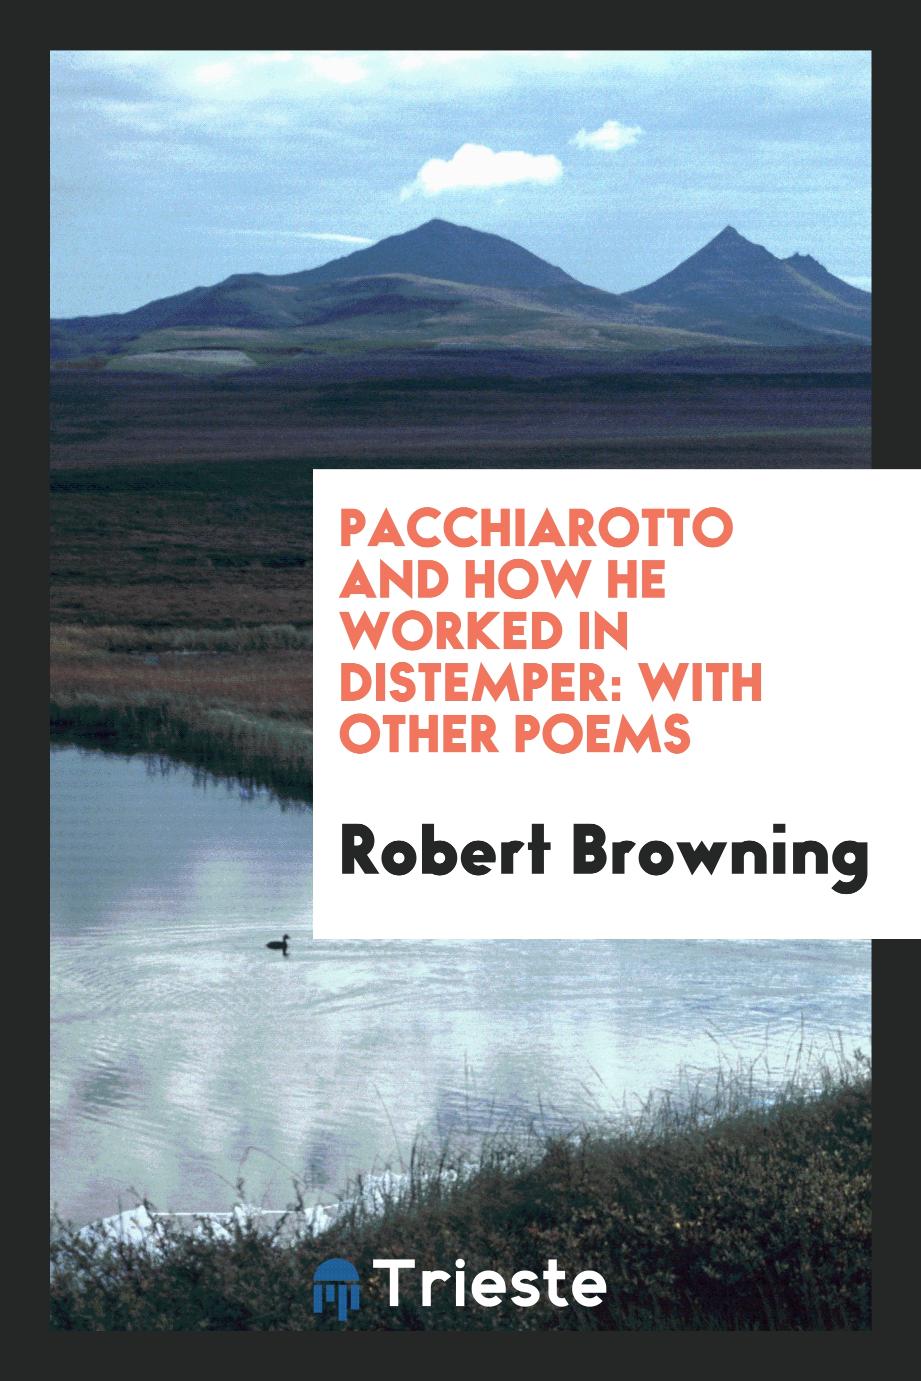 Pacchiarotto and how he worked in distemper: with other poems